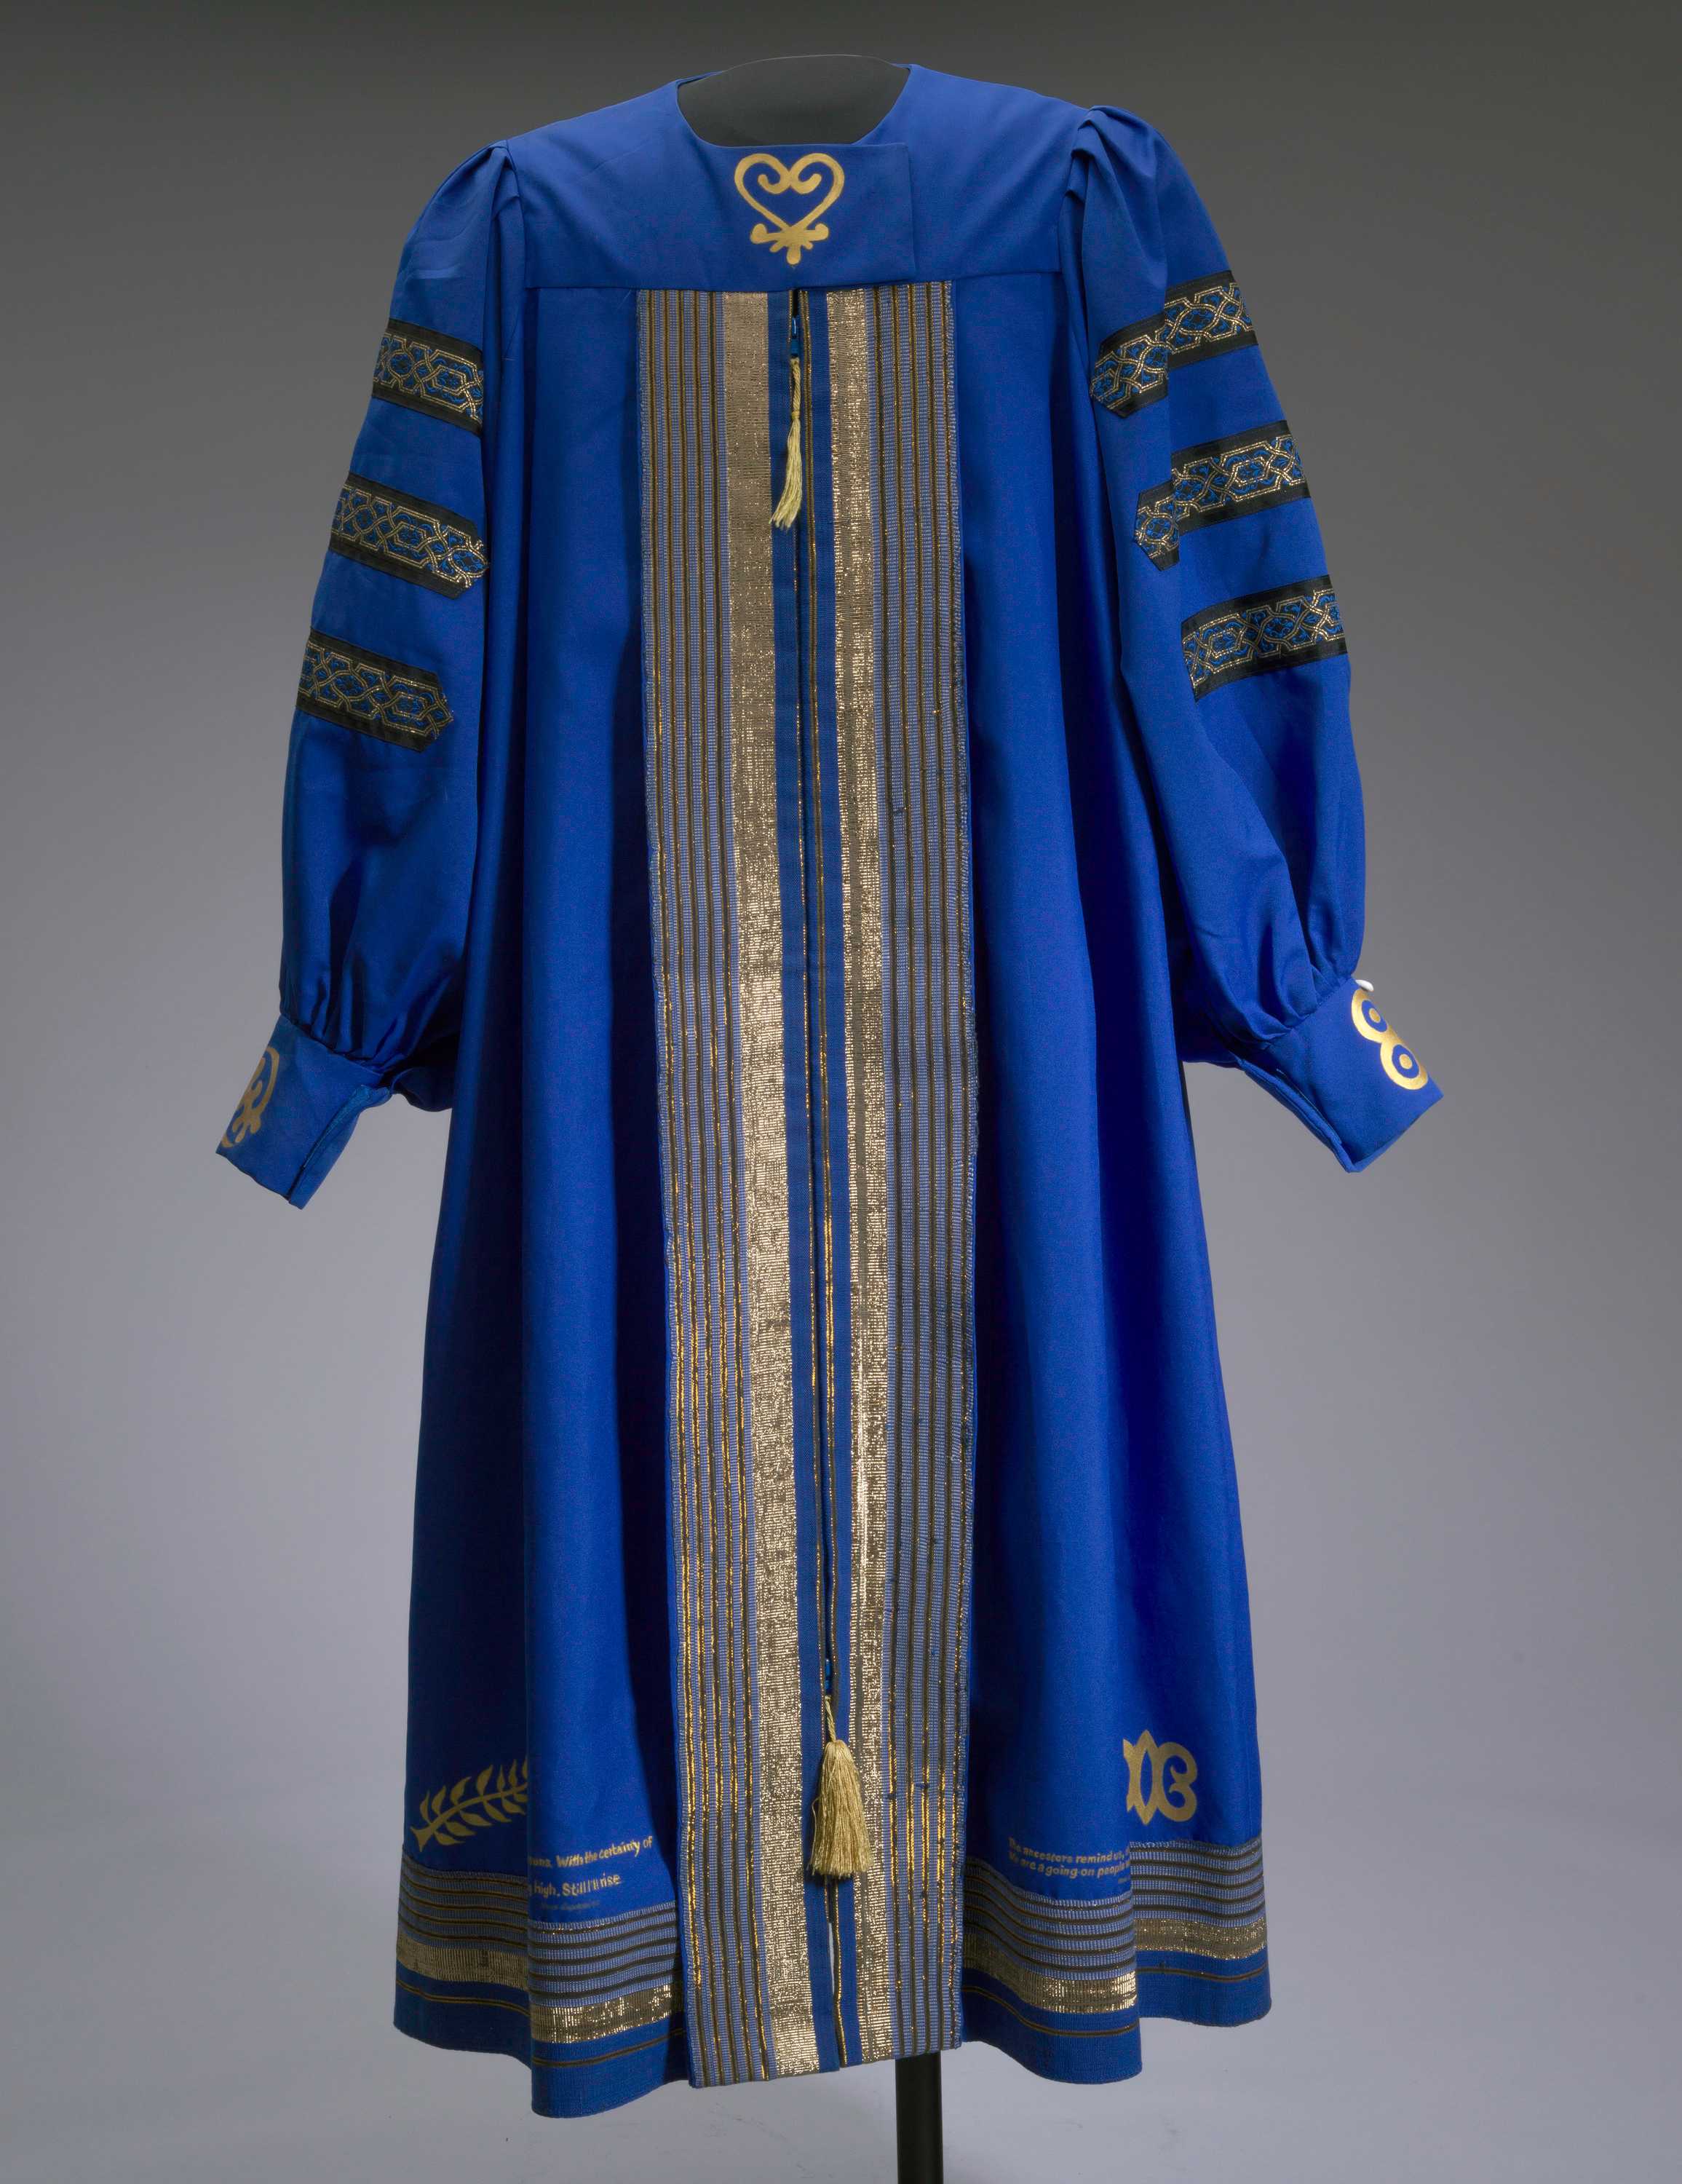 An academic robe in blue and gold from Bennett College worn by Dr. Johnnetta Betsch Cole with custom designs by Barbara Nicholson.